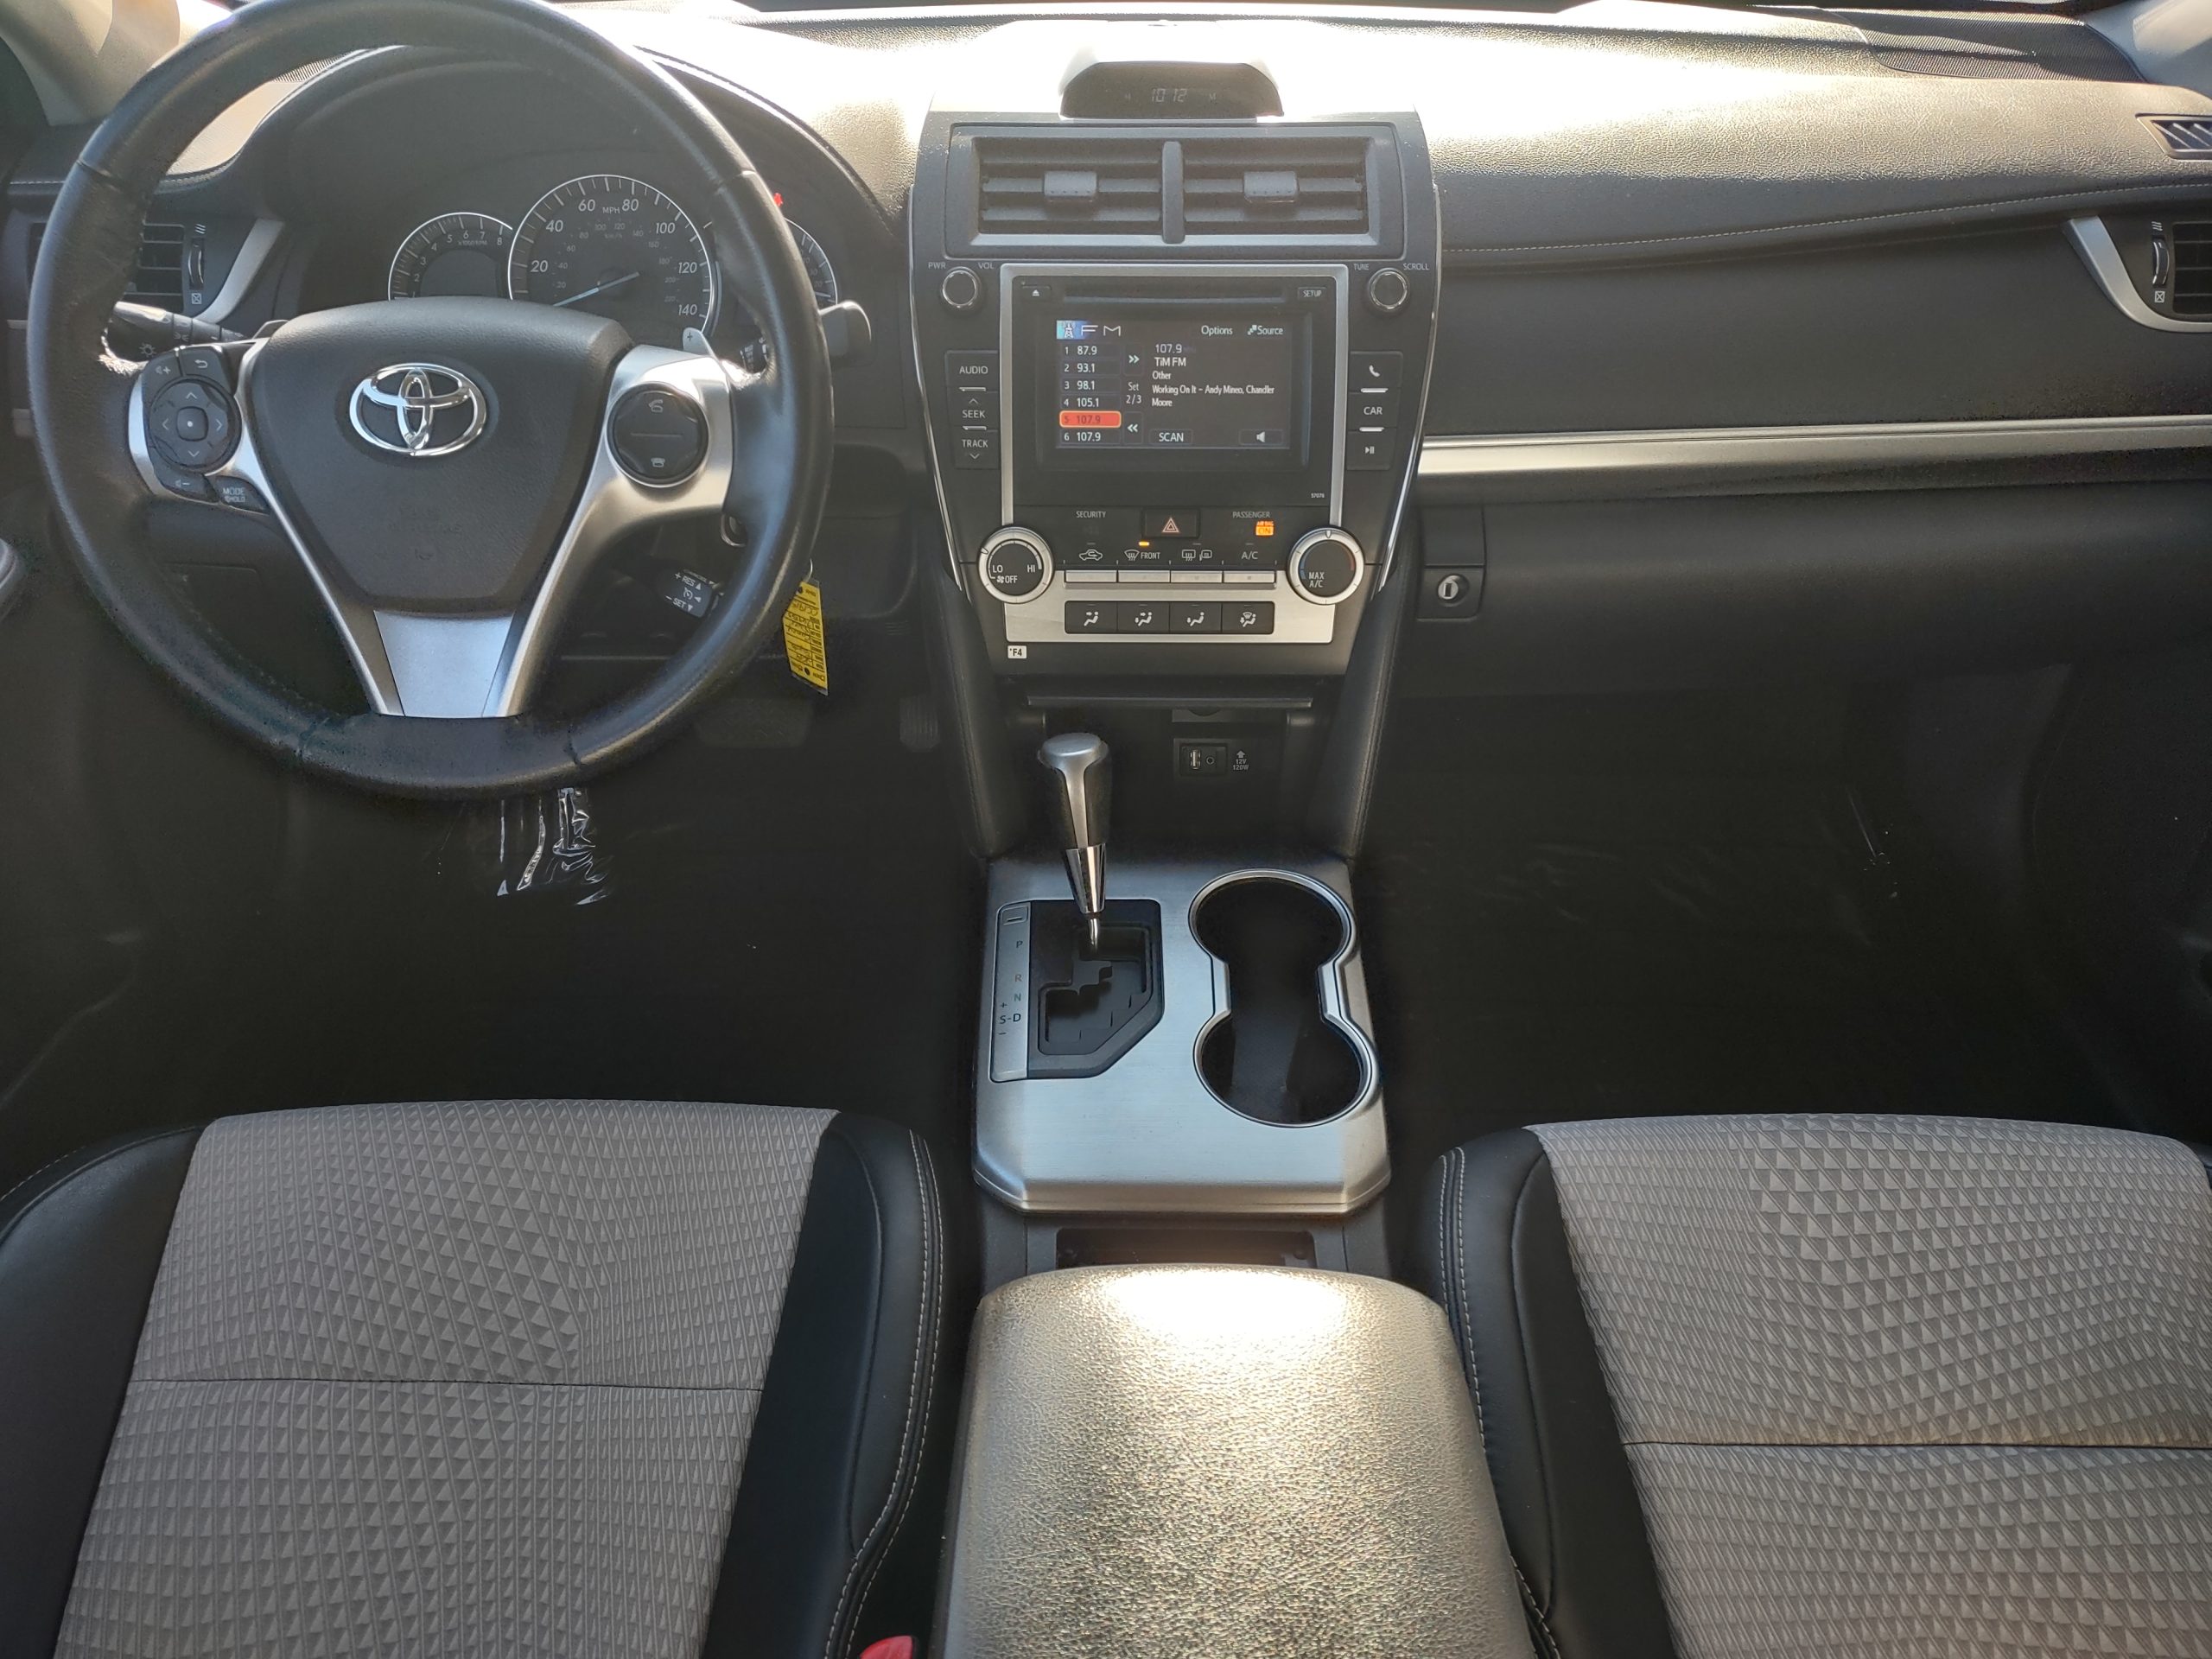 Used 2014 Toyota Camry SE Sedan for sale in 